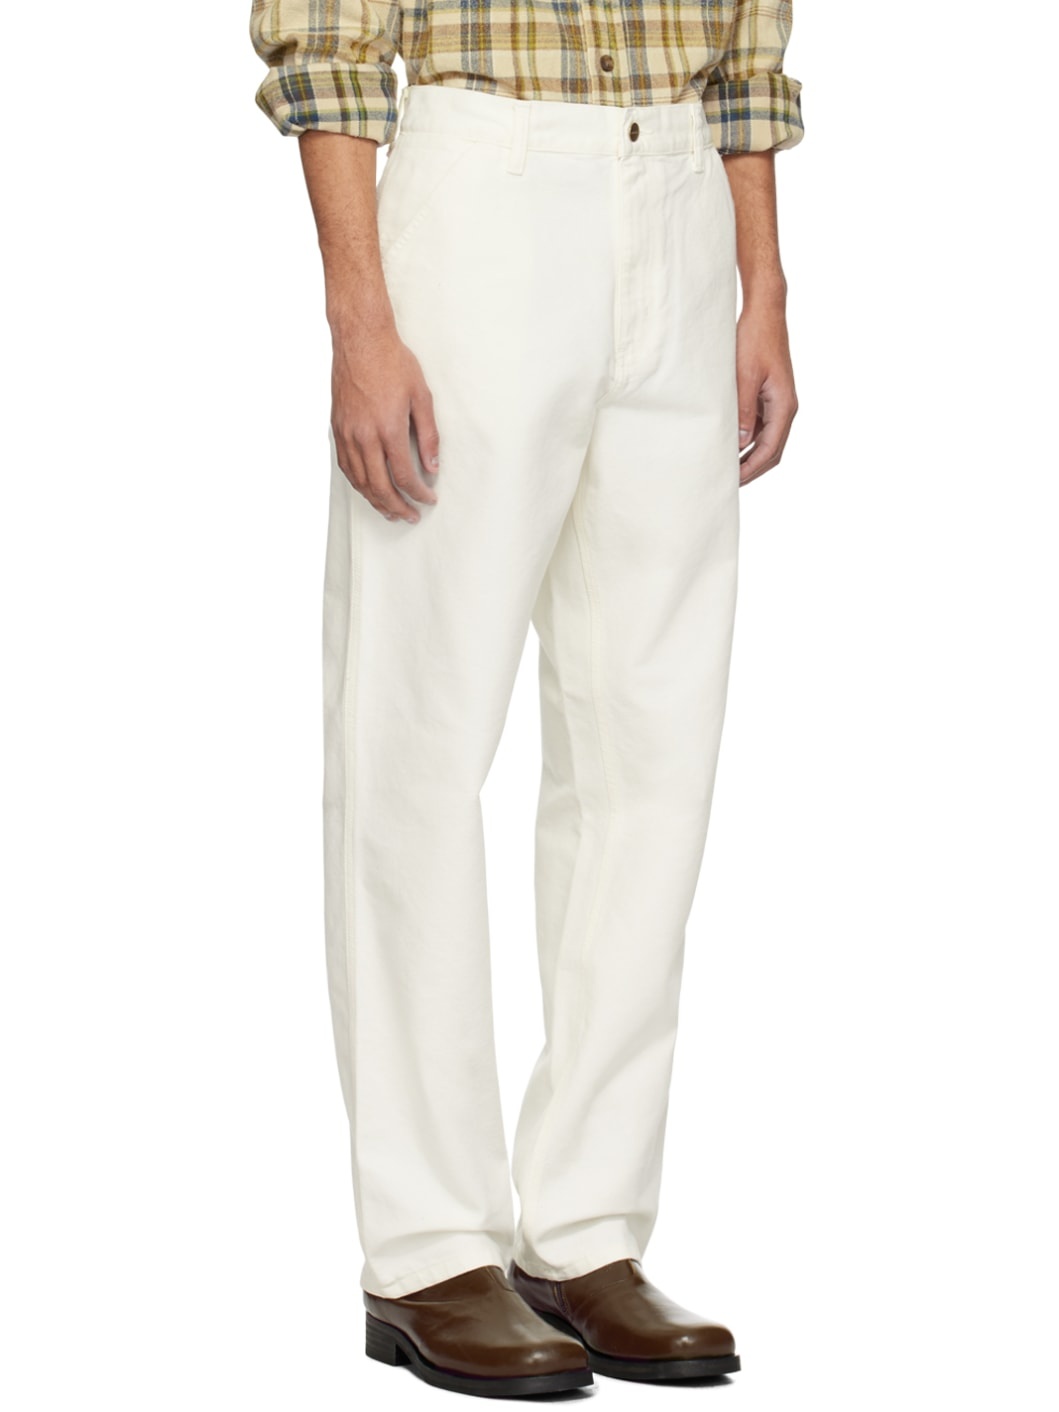 White Simple Trousers - 2